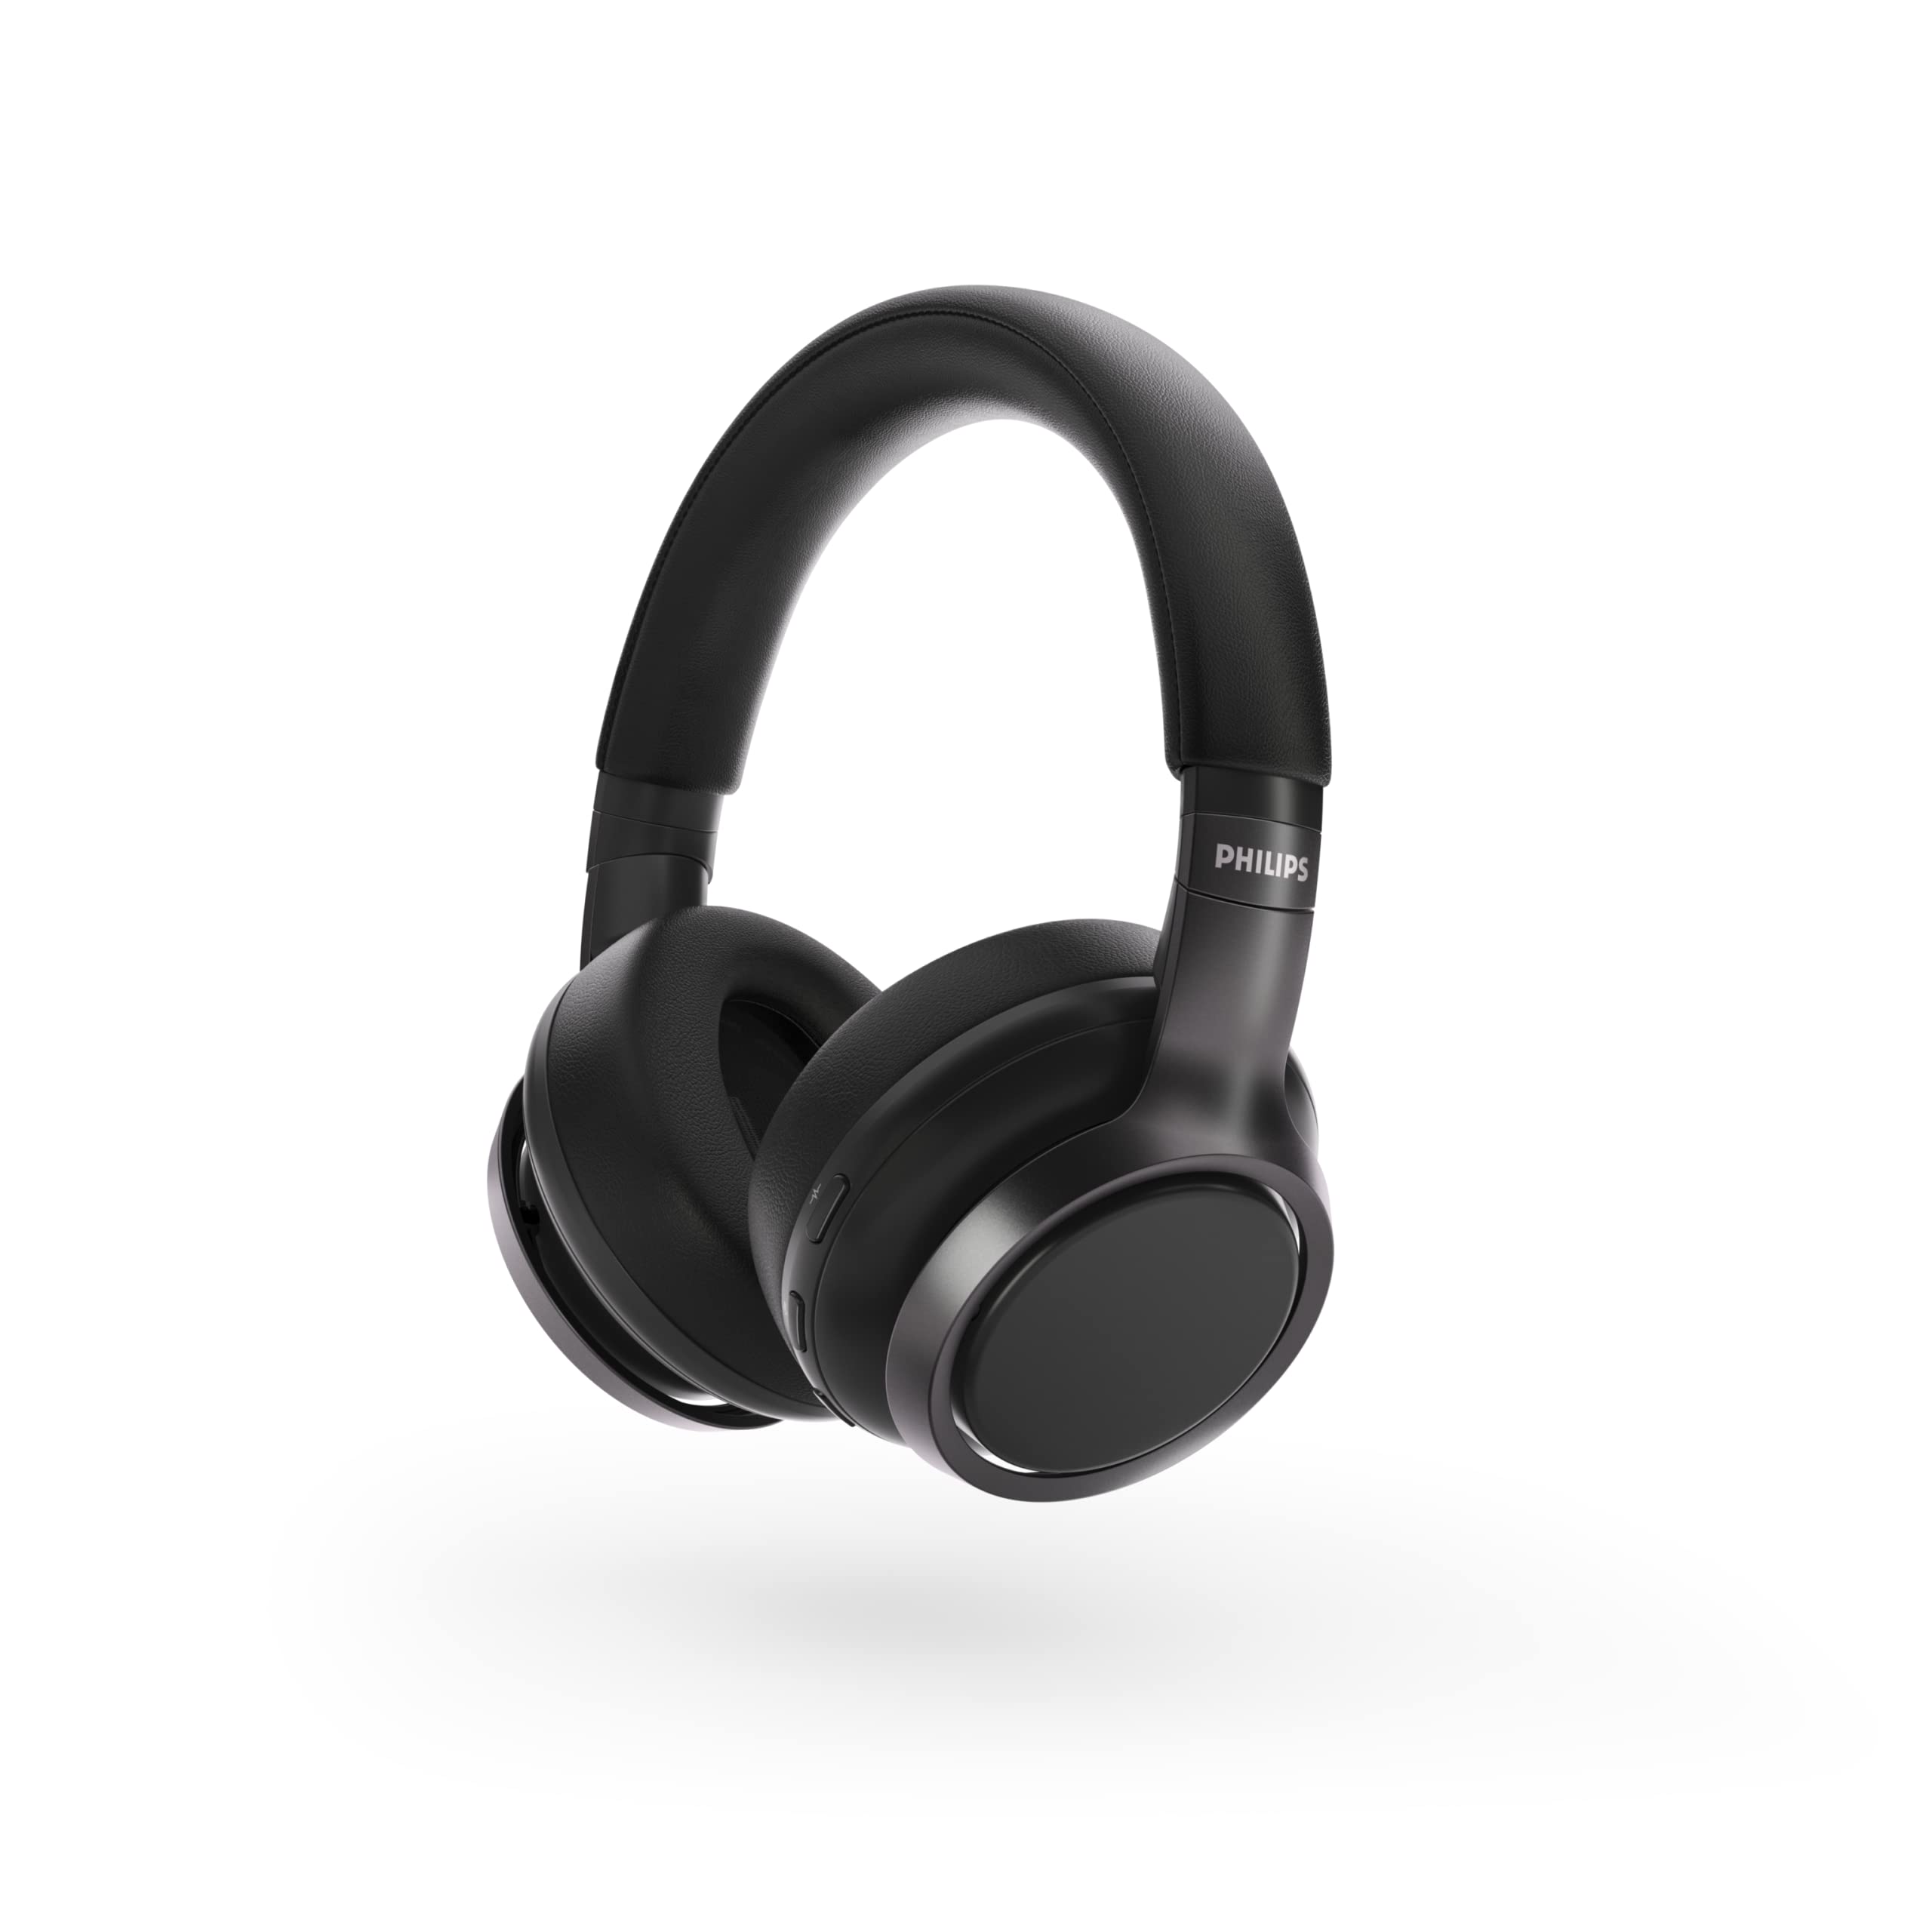 Philips Audio Philips H9505 Hybrid Active Noise Cancelling (ANC) Over Ear Wireless Bluetooth Pro-Performance Headphones avec connexion Bluetooth multipoint